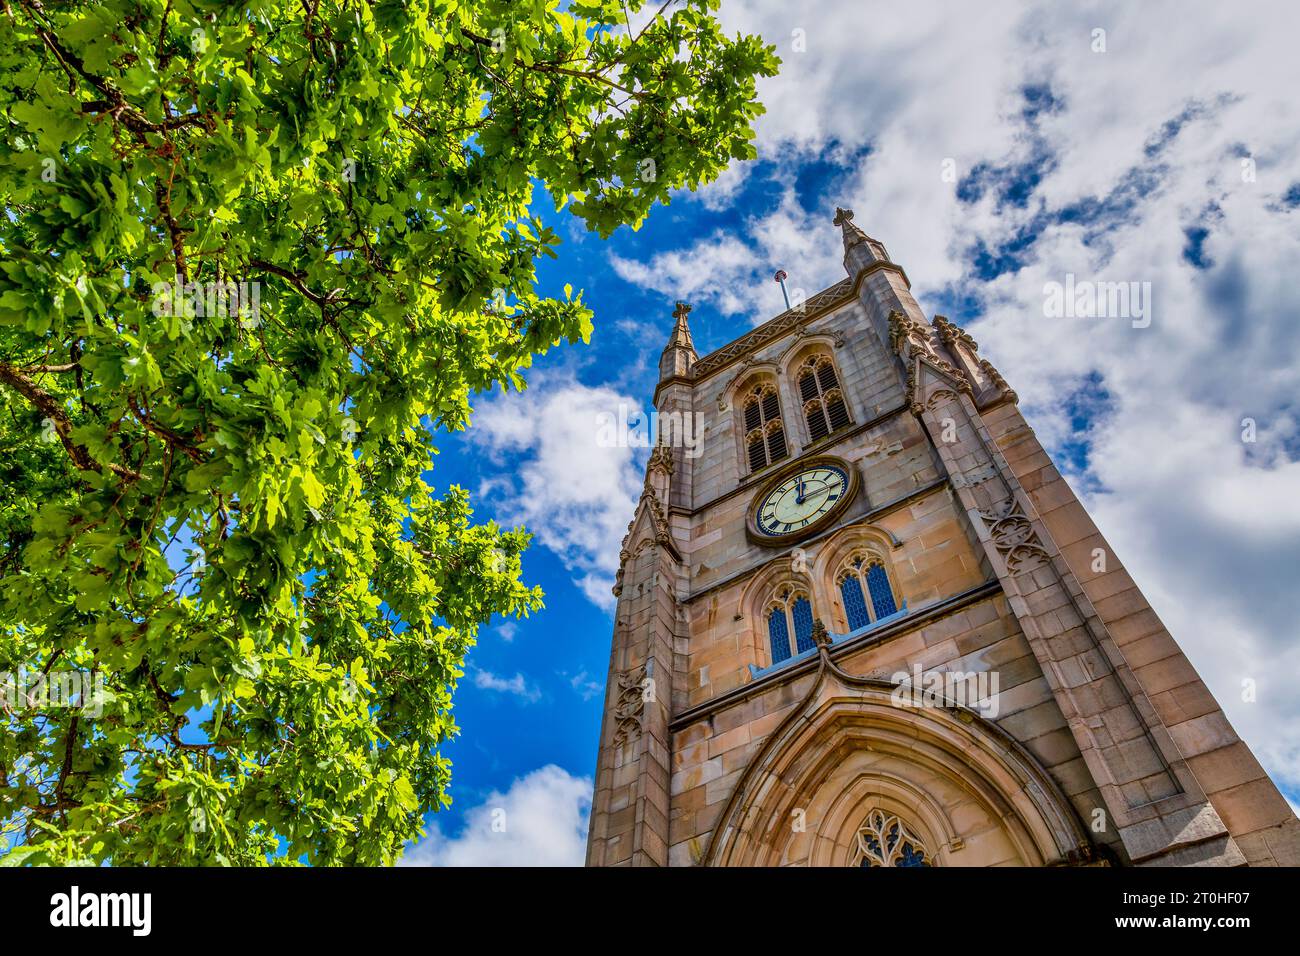 Blackburn Cathedral. Anglican cathedral situated in the heart of Blackburn town centre in Lancashire, England. Stock Photo